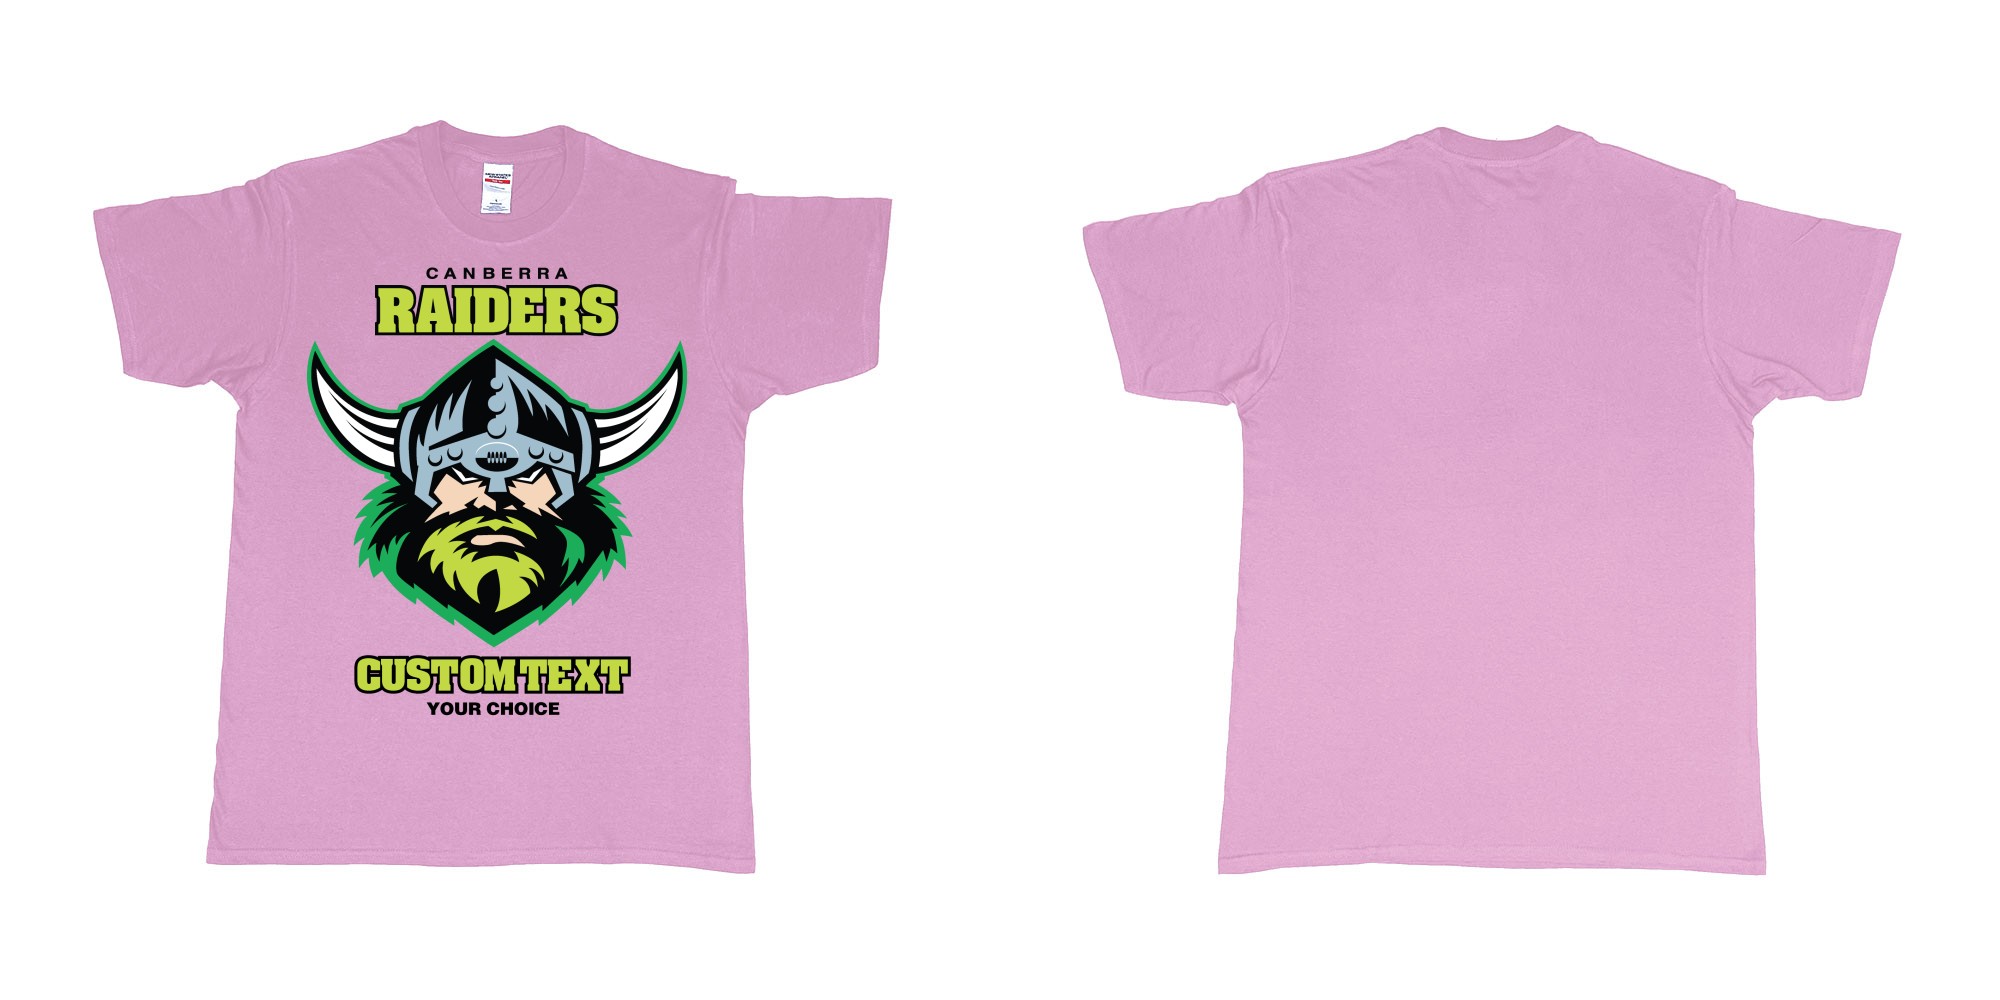 Custom tshirt design canberra raiders nrl logo own printed text near you in fabric color light-pink choice your own text made in Bali by The Pirate Way